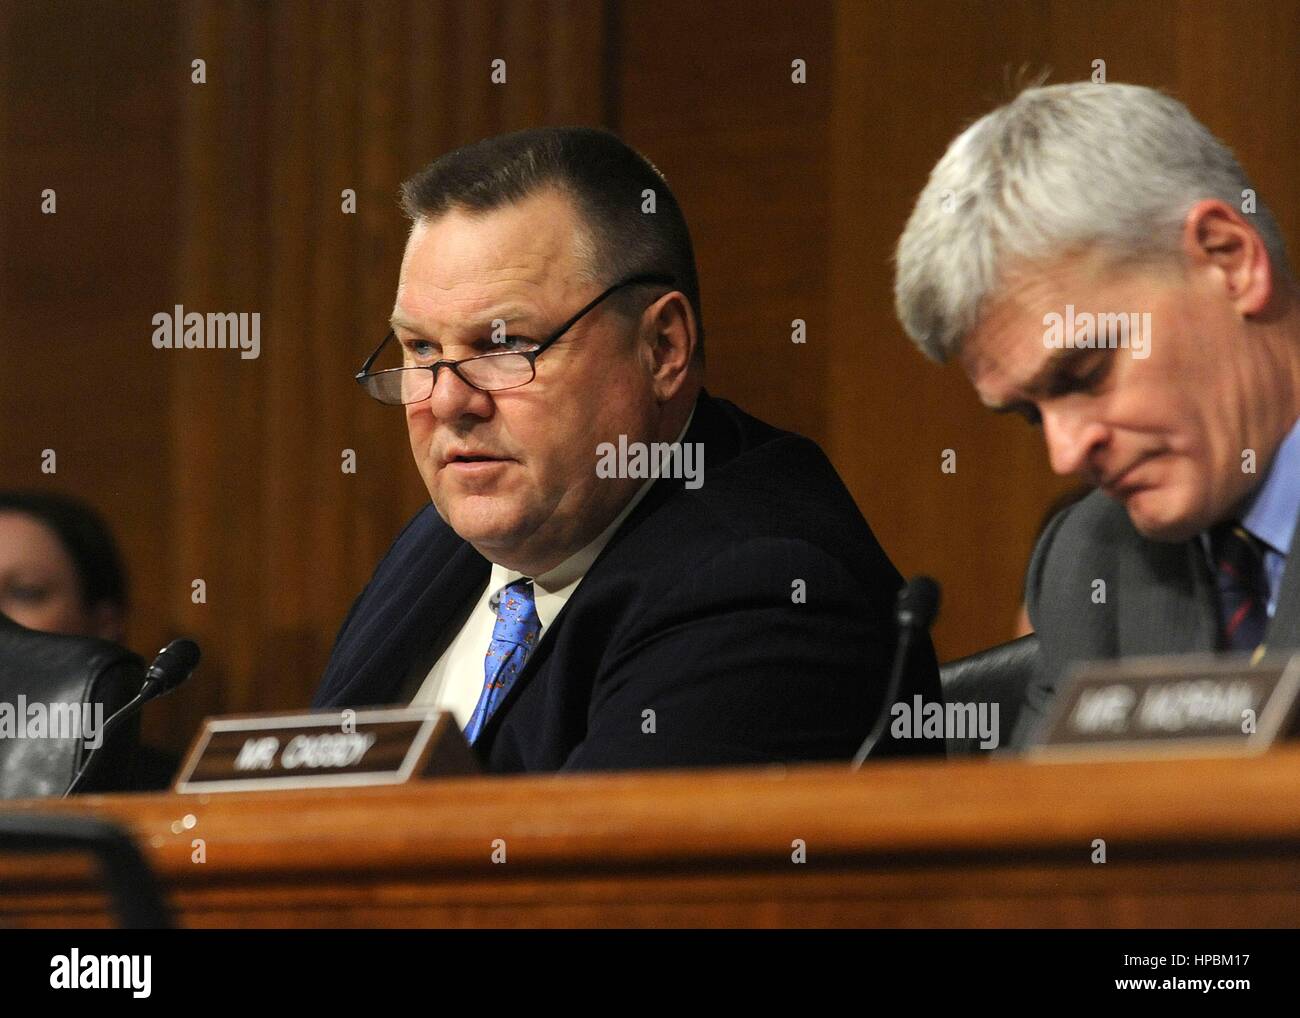 U.S. Senator Jon Tester, of Montana asks a question of Dr. David Shulkin during confirmation hearings in the Senate Veterans Affairs Committee February 1, 2017 in Washington, DC. Shulkin was confirmed as the new head of the Veterans Affairs administration by a unanimous vote. Stock Photo